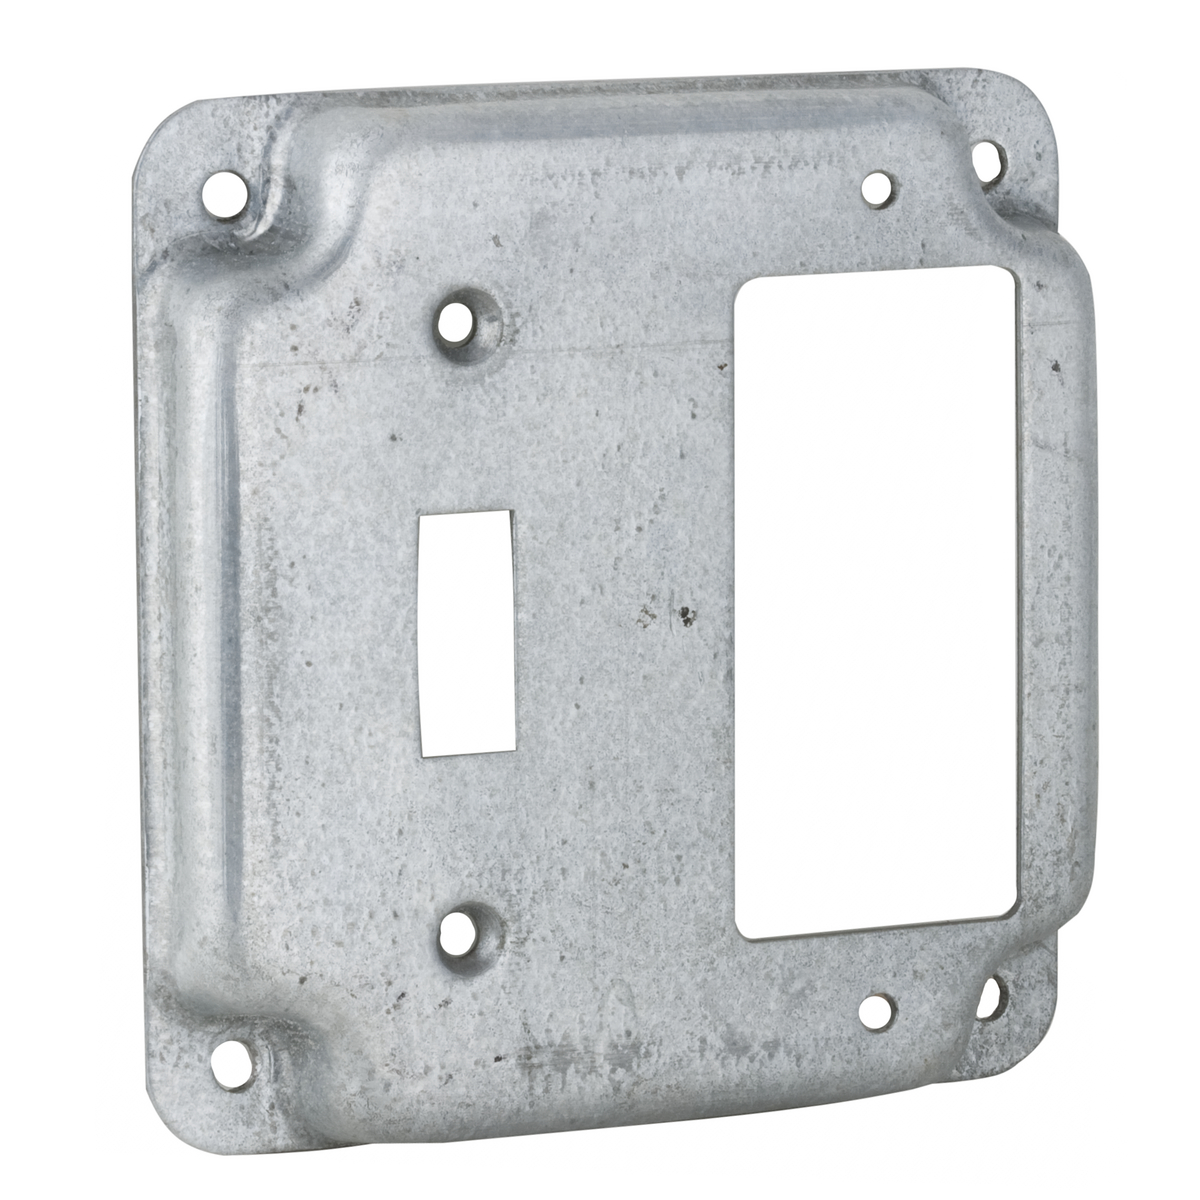 RACO 814C 4" SQUARE EXPOSED WORK COVER, 1 TOGGLE & 1 GFCI